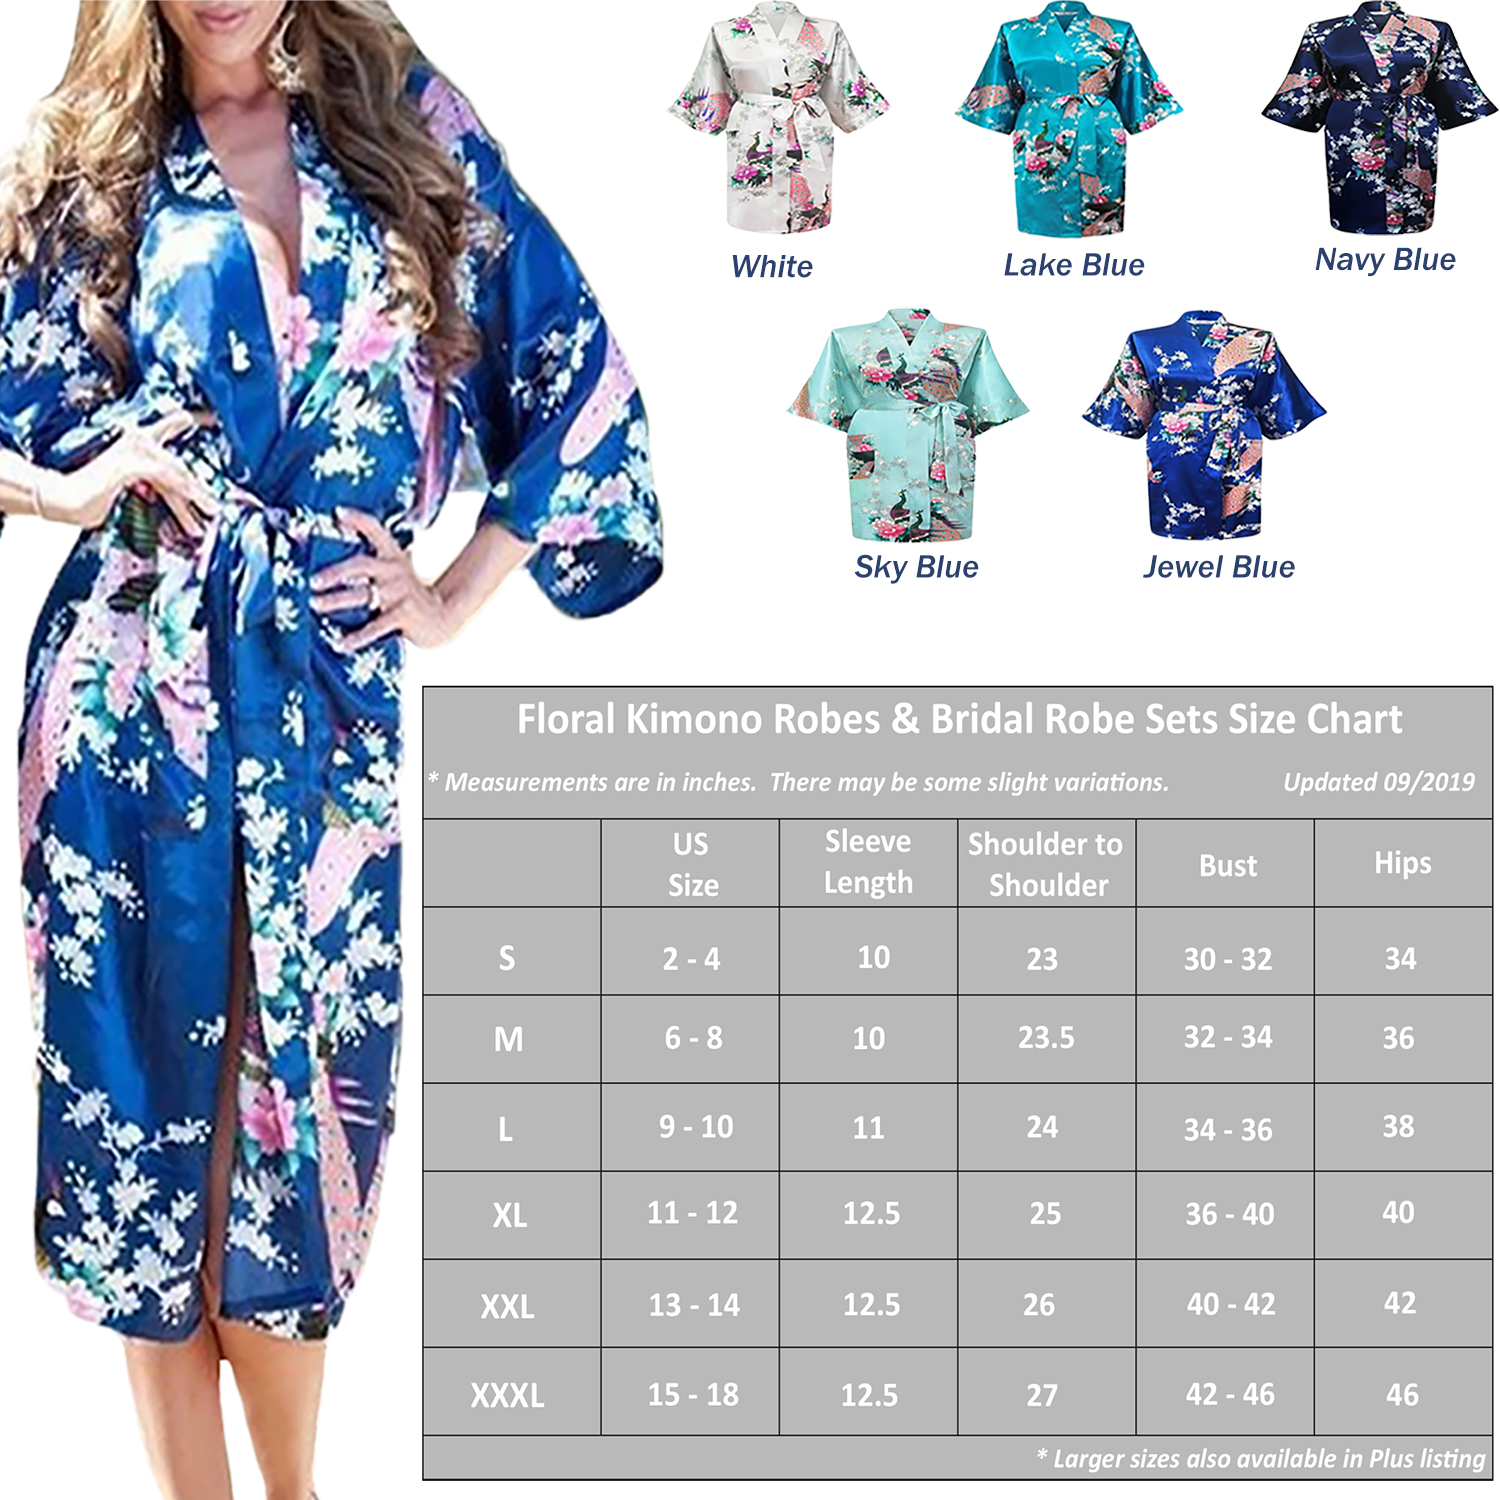 Gifts Are Blue Floral Bridal Party Bride Bridesmaid Robes Sets Sizes 2 20 Set Of 6